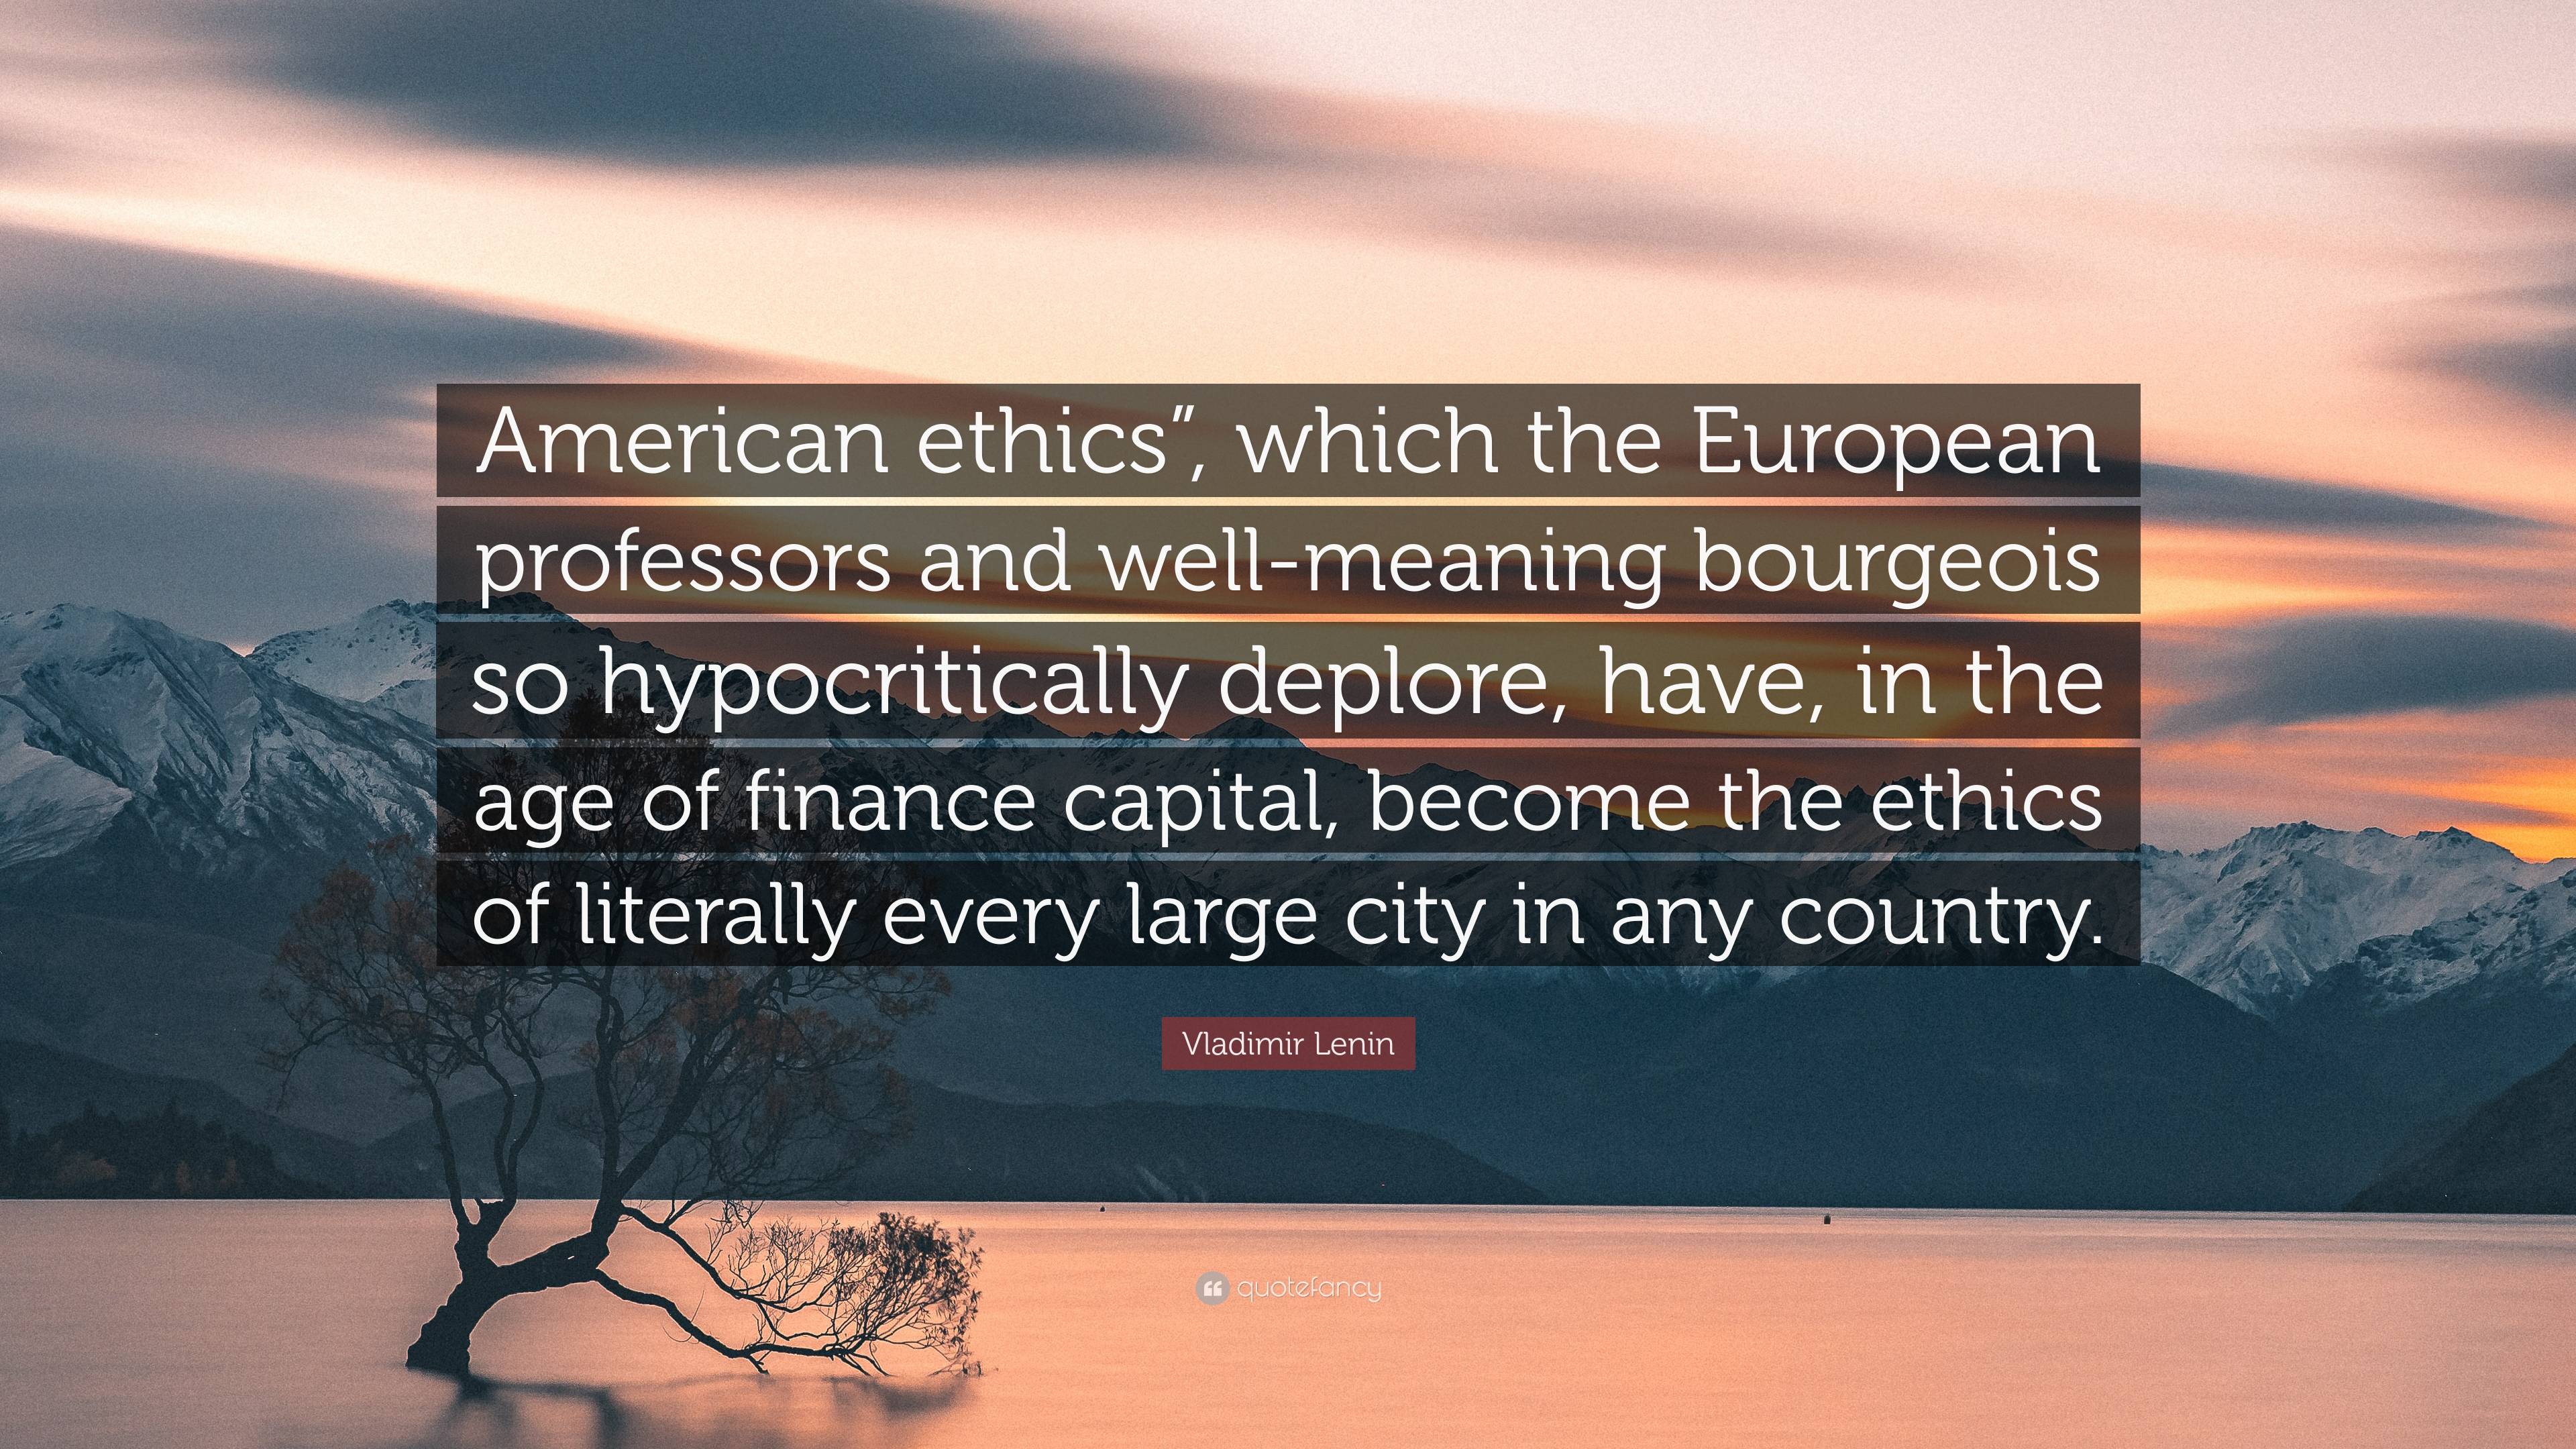 Vladimir Lenin Quote: “American ethics”, which the European professors and  well-meaning bourgeois so hypocritically deplore, have, in the age o”